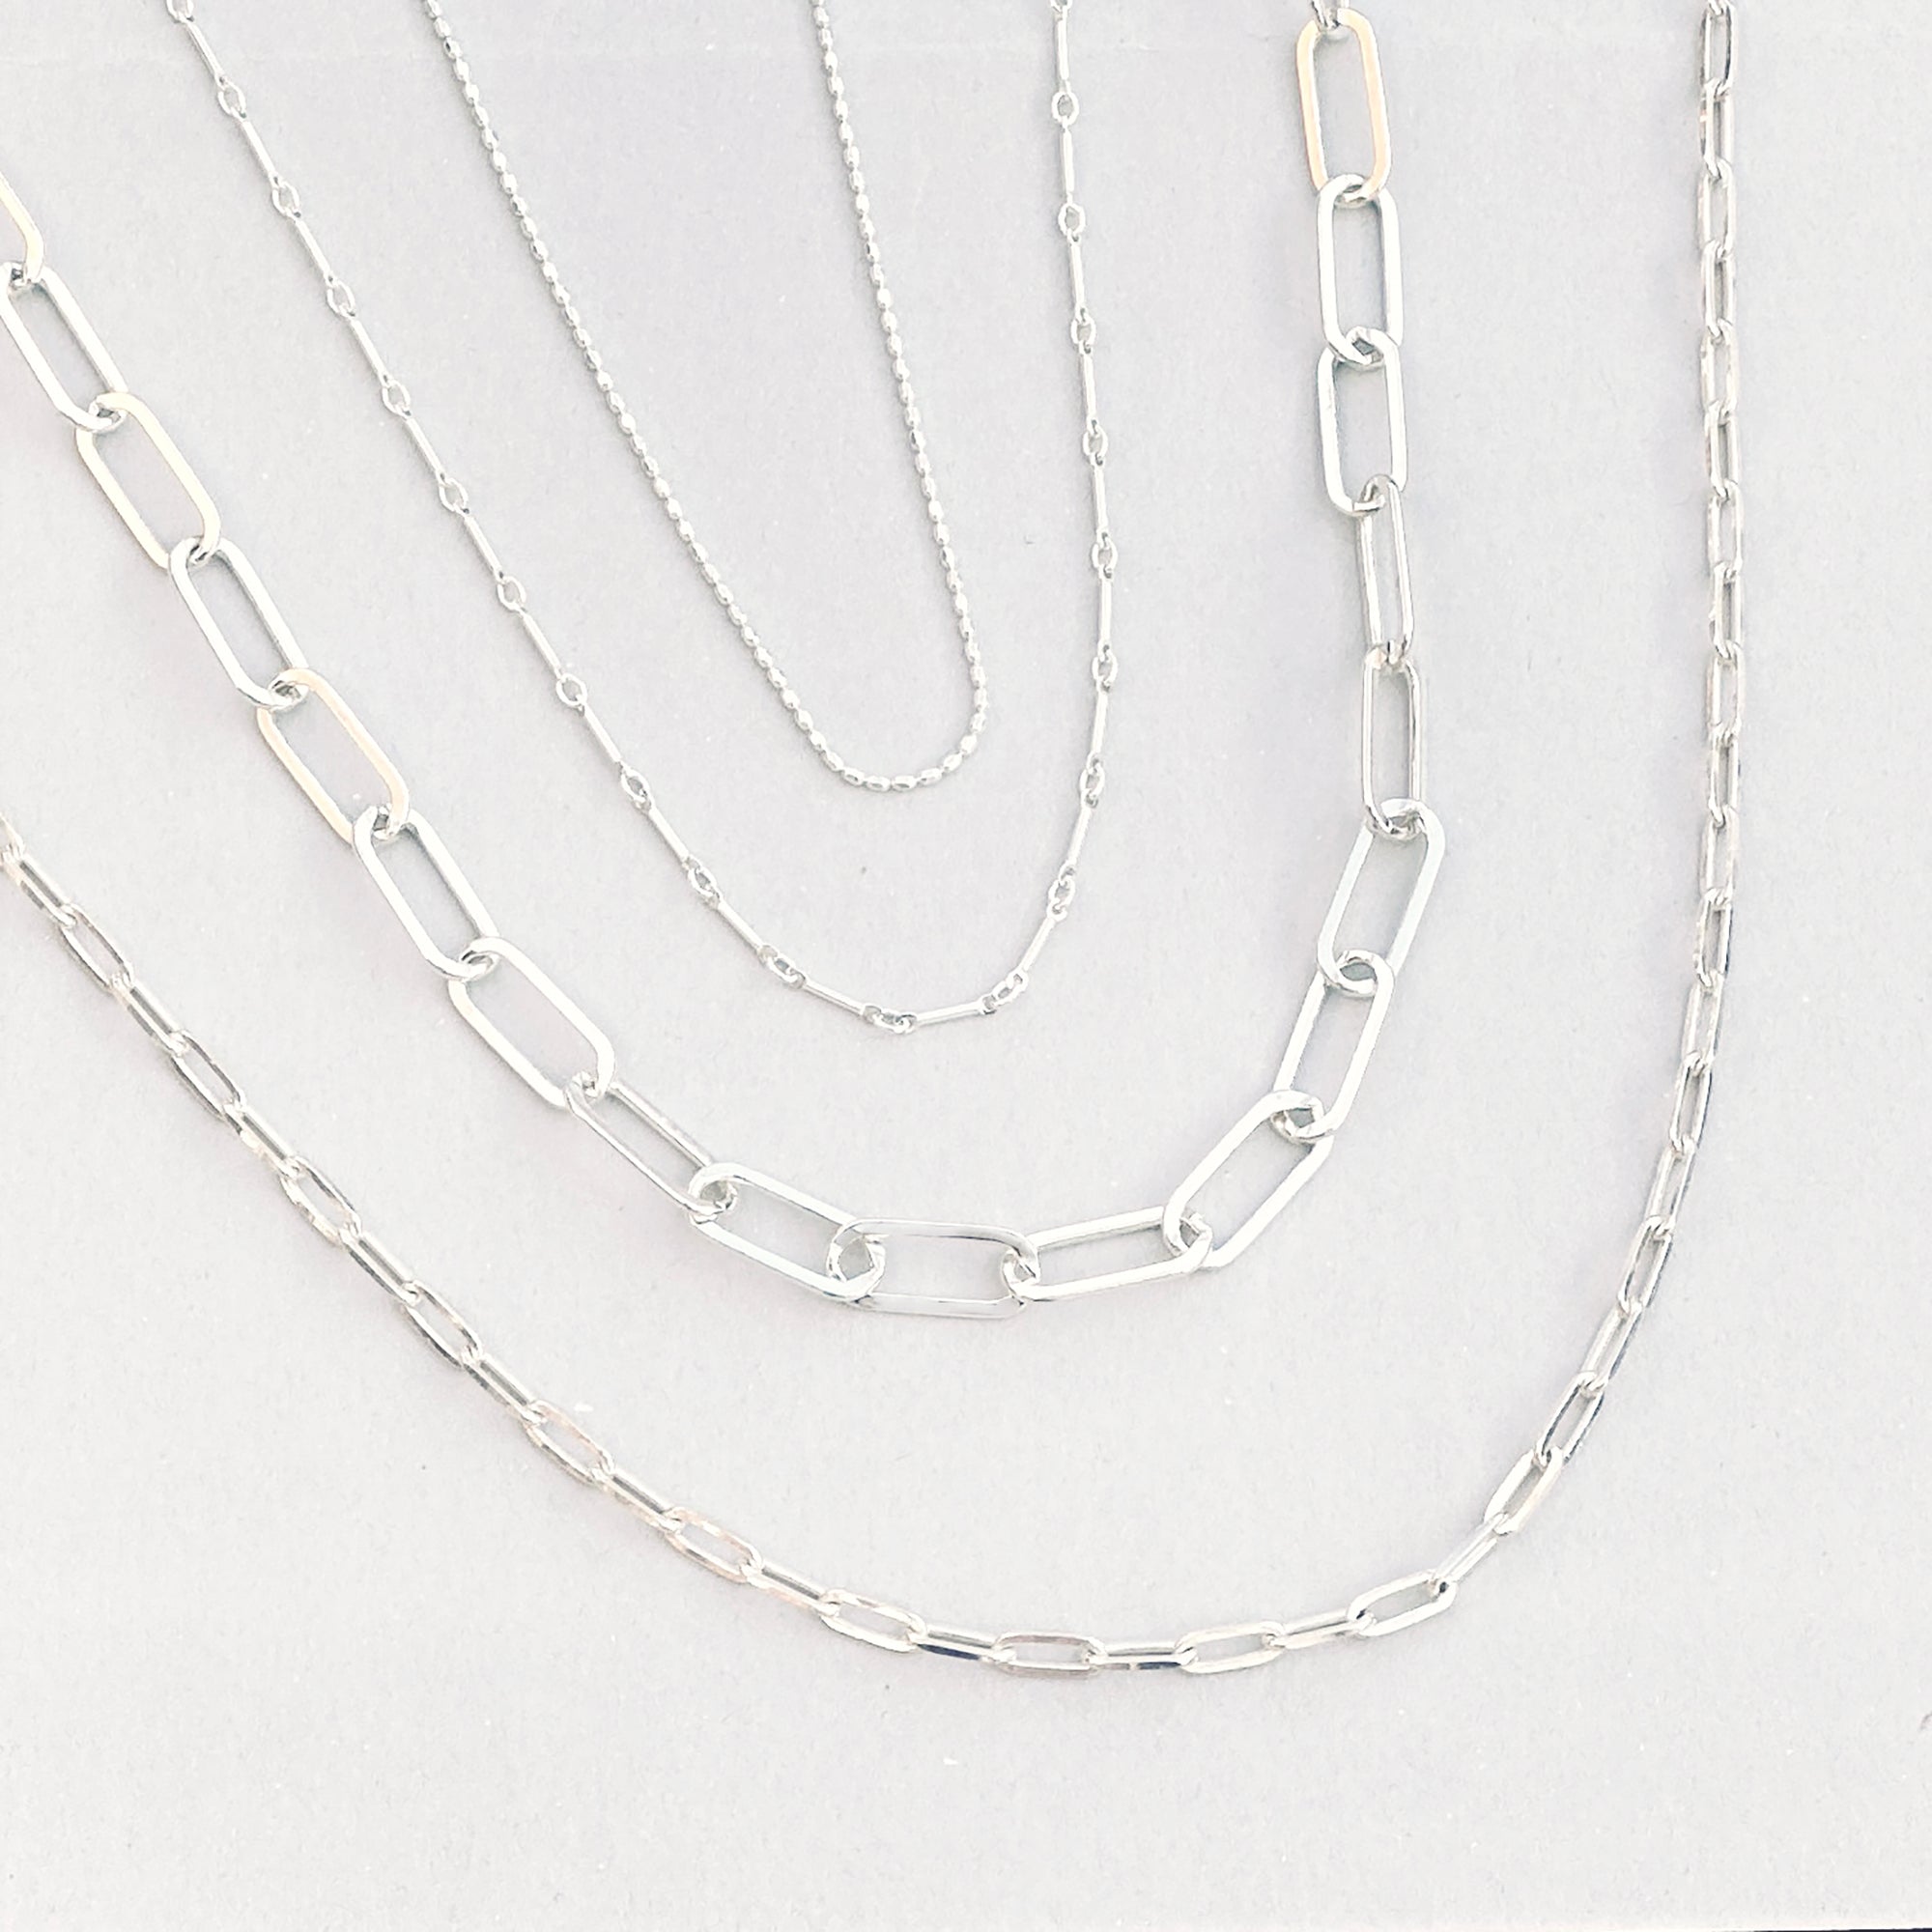 four silver necklaces layered to make a premade necklace stack